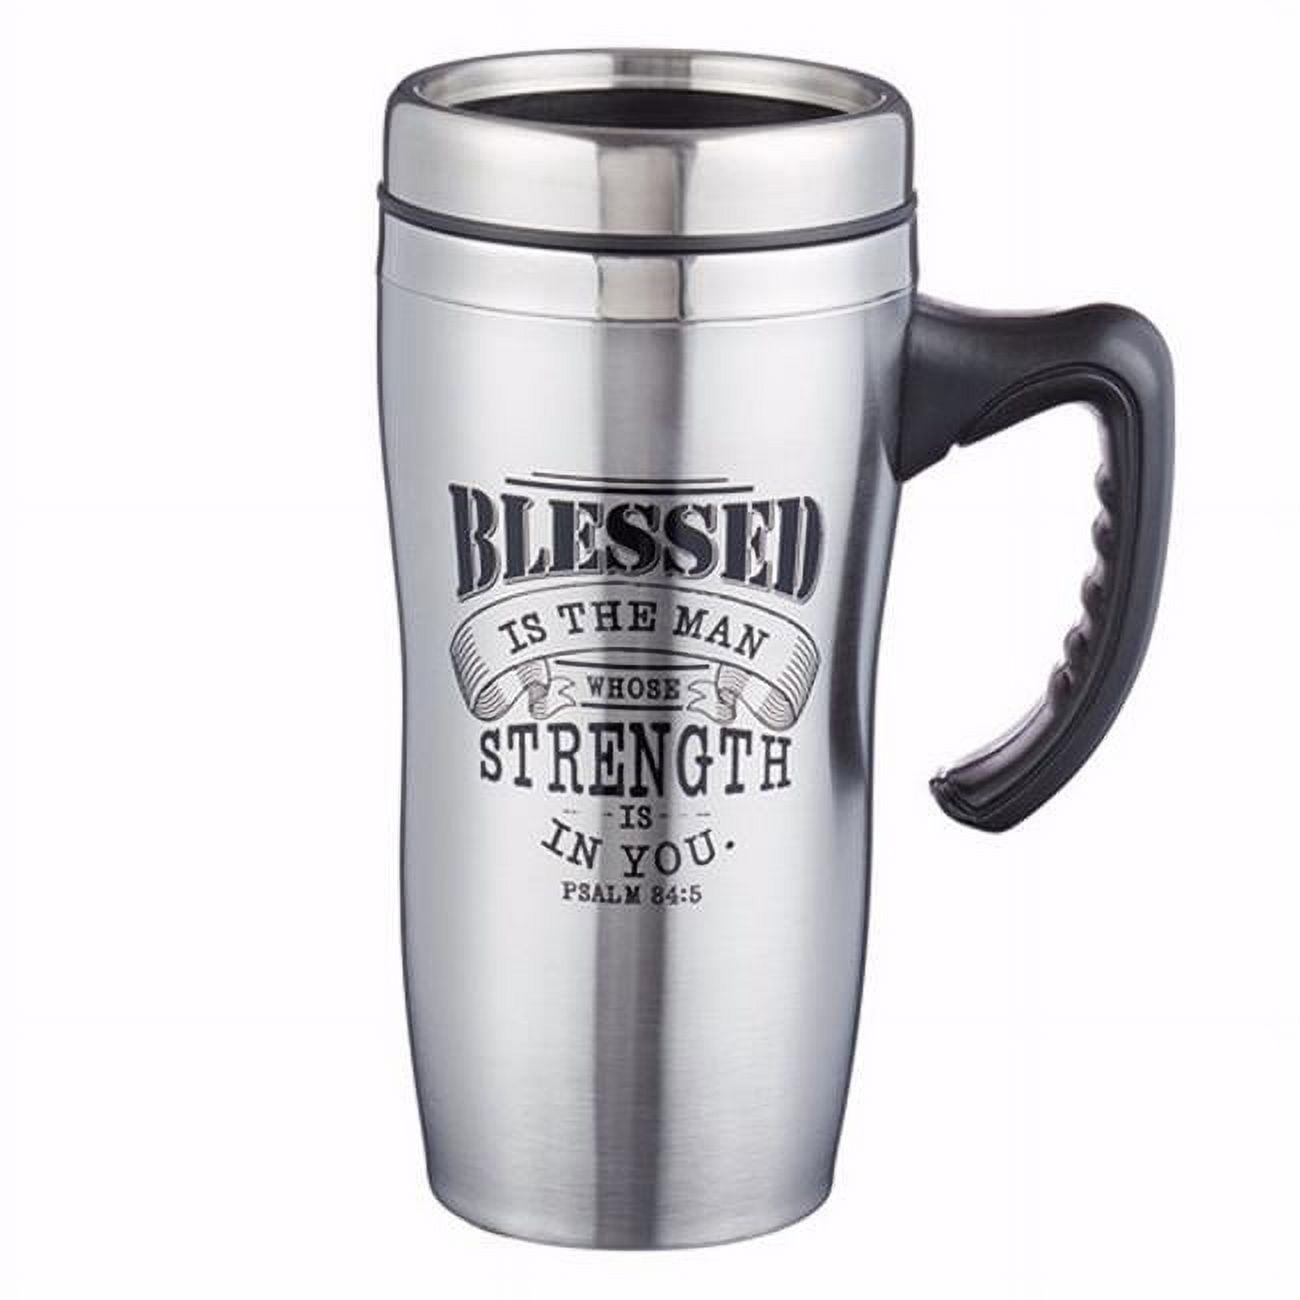 170765 Travel Mug Blessed With Handle, Stainless